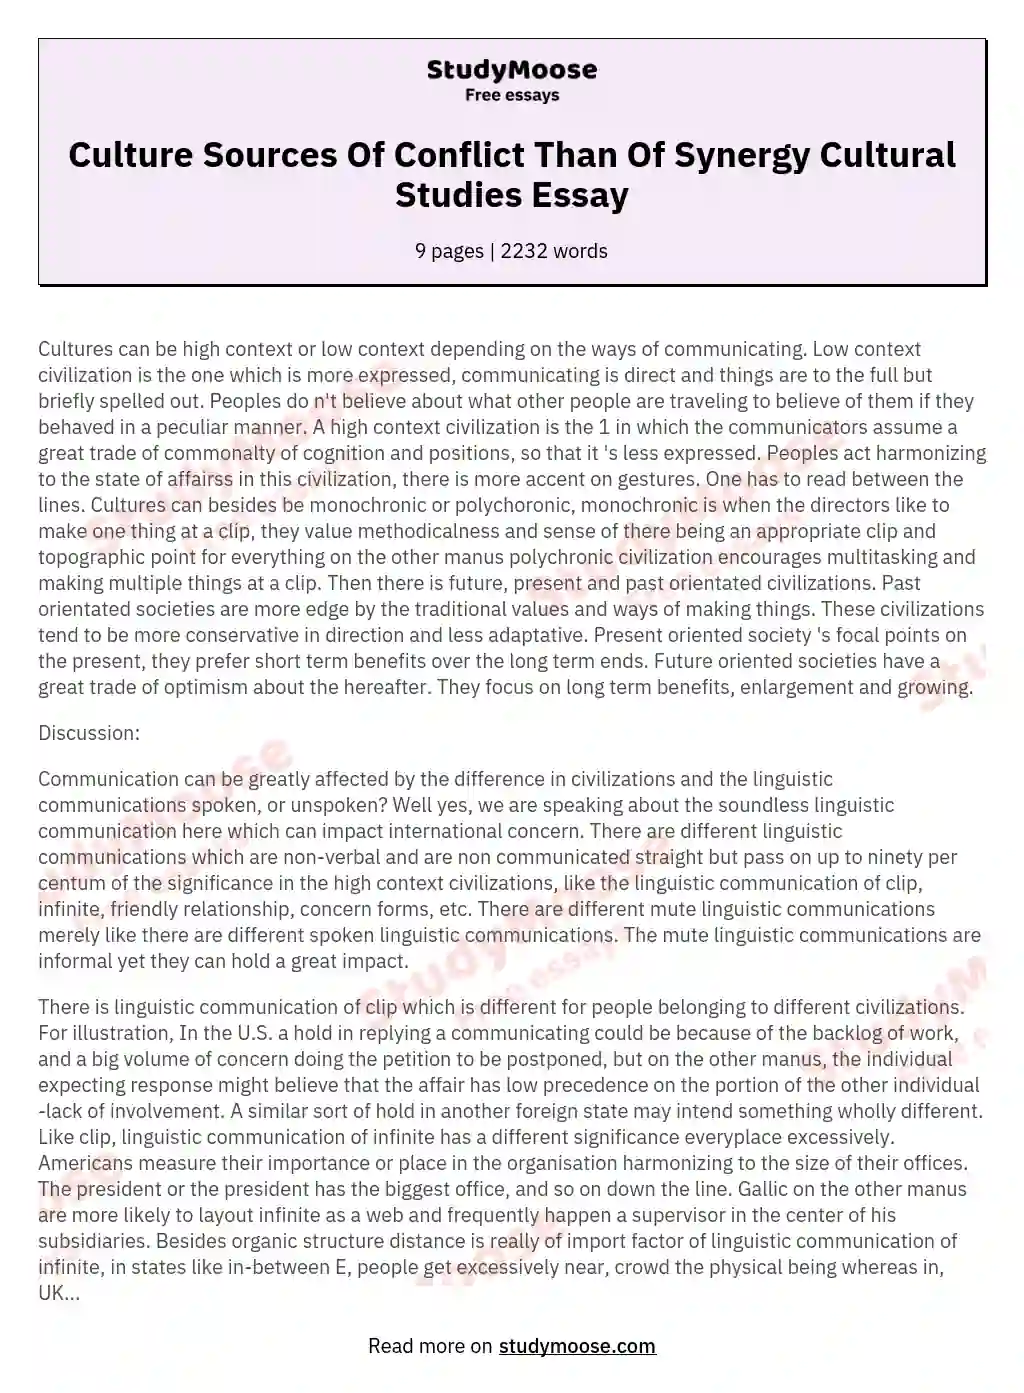 Culture Sources Of Conflict Than Of Synergy Cultural Studies Essay essay